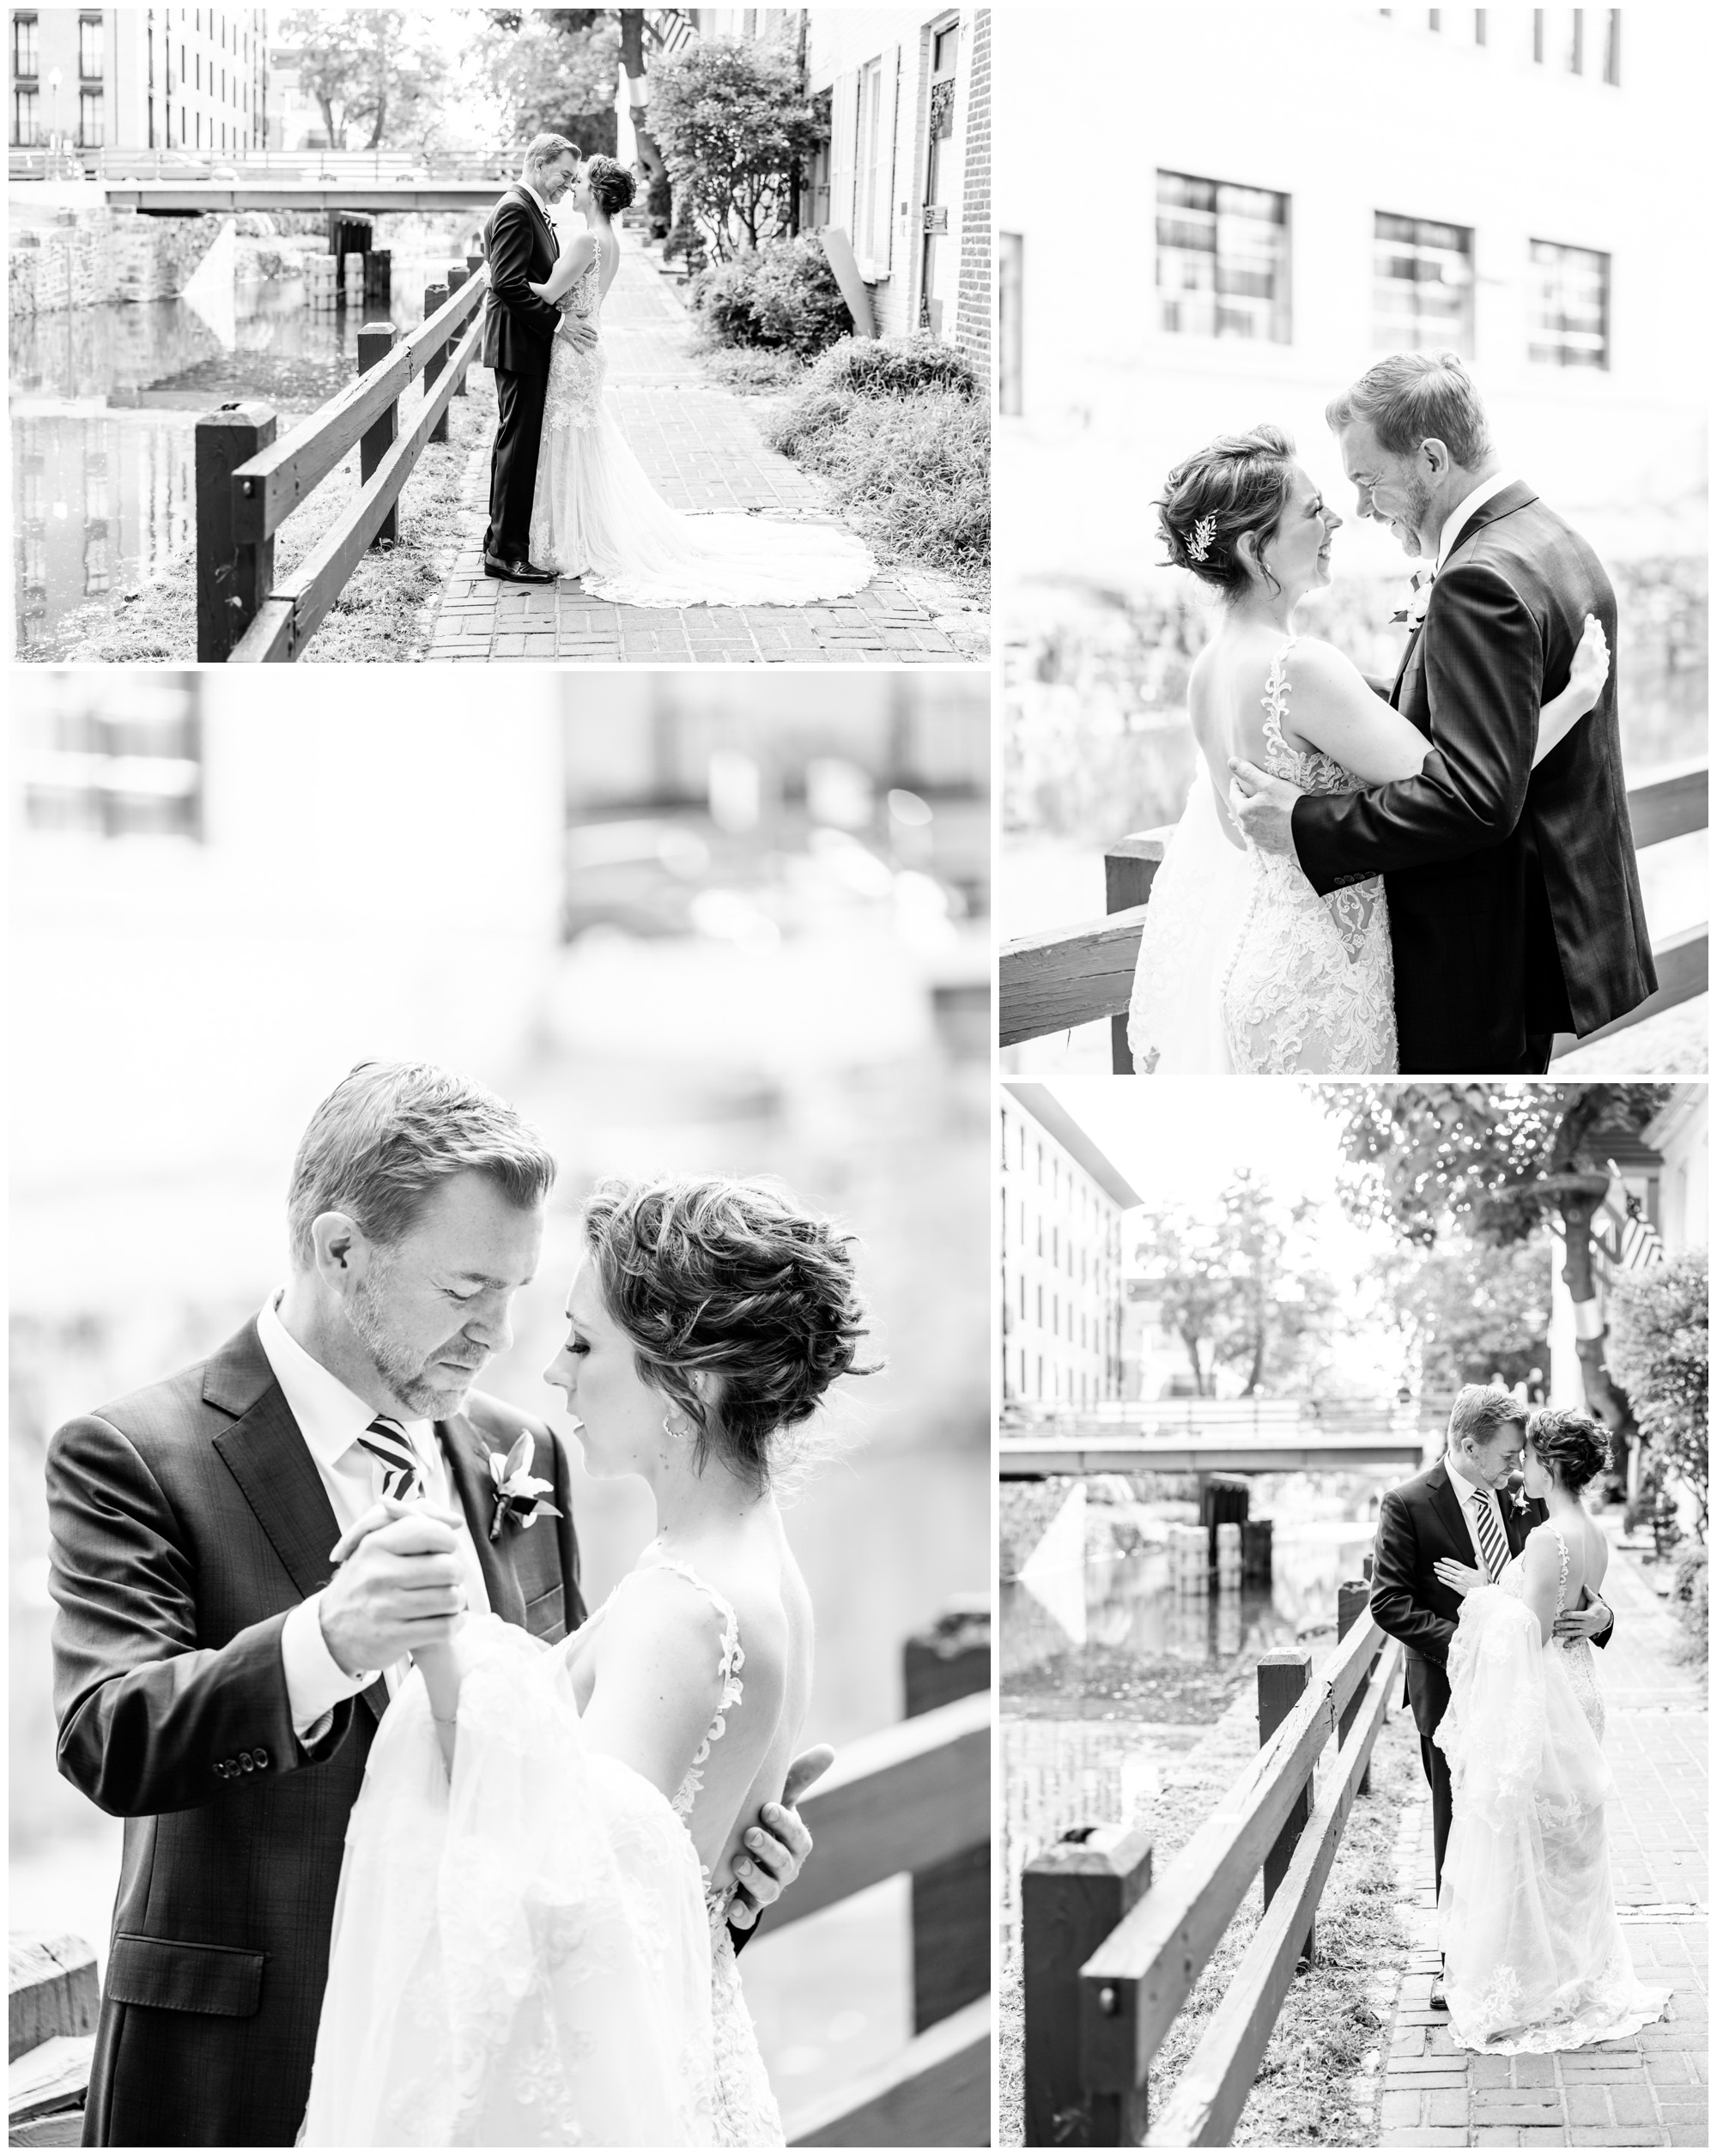 romantic Ritz Carlton Georgetown wedding, summer wedding aesthetic, green and white aesthetic, summer D.C. wedding, D.C. wedding venues, Ritz Carlton wedding, Washington D.C. wedding, romantic wedding aesthetic, Georgetown wedding, Rachel E.H. Photography, D.C. photographer, black and white, couple holding each other, couple against wooden fence